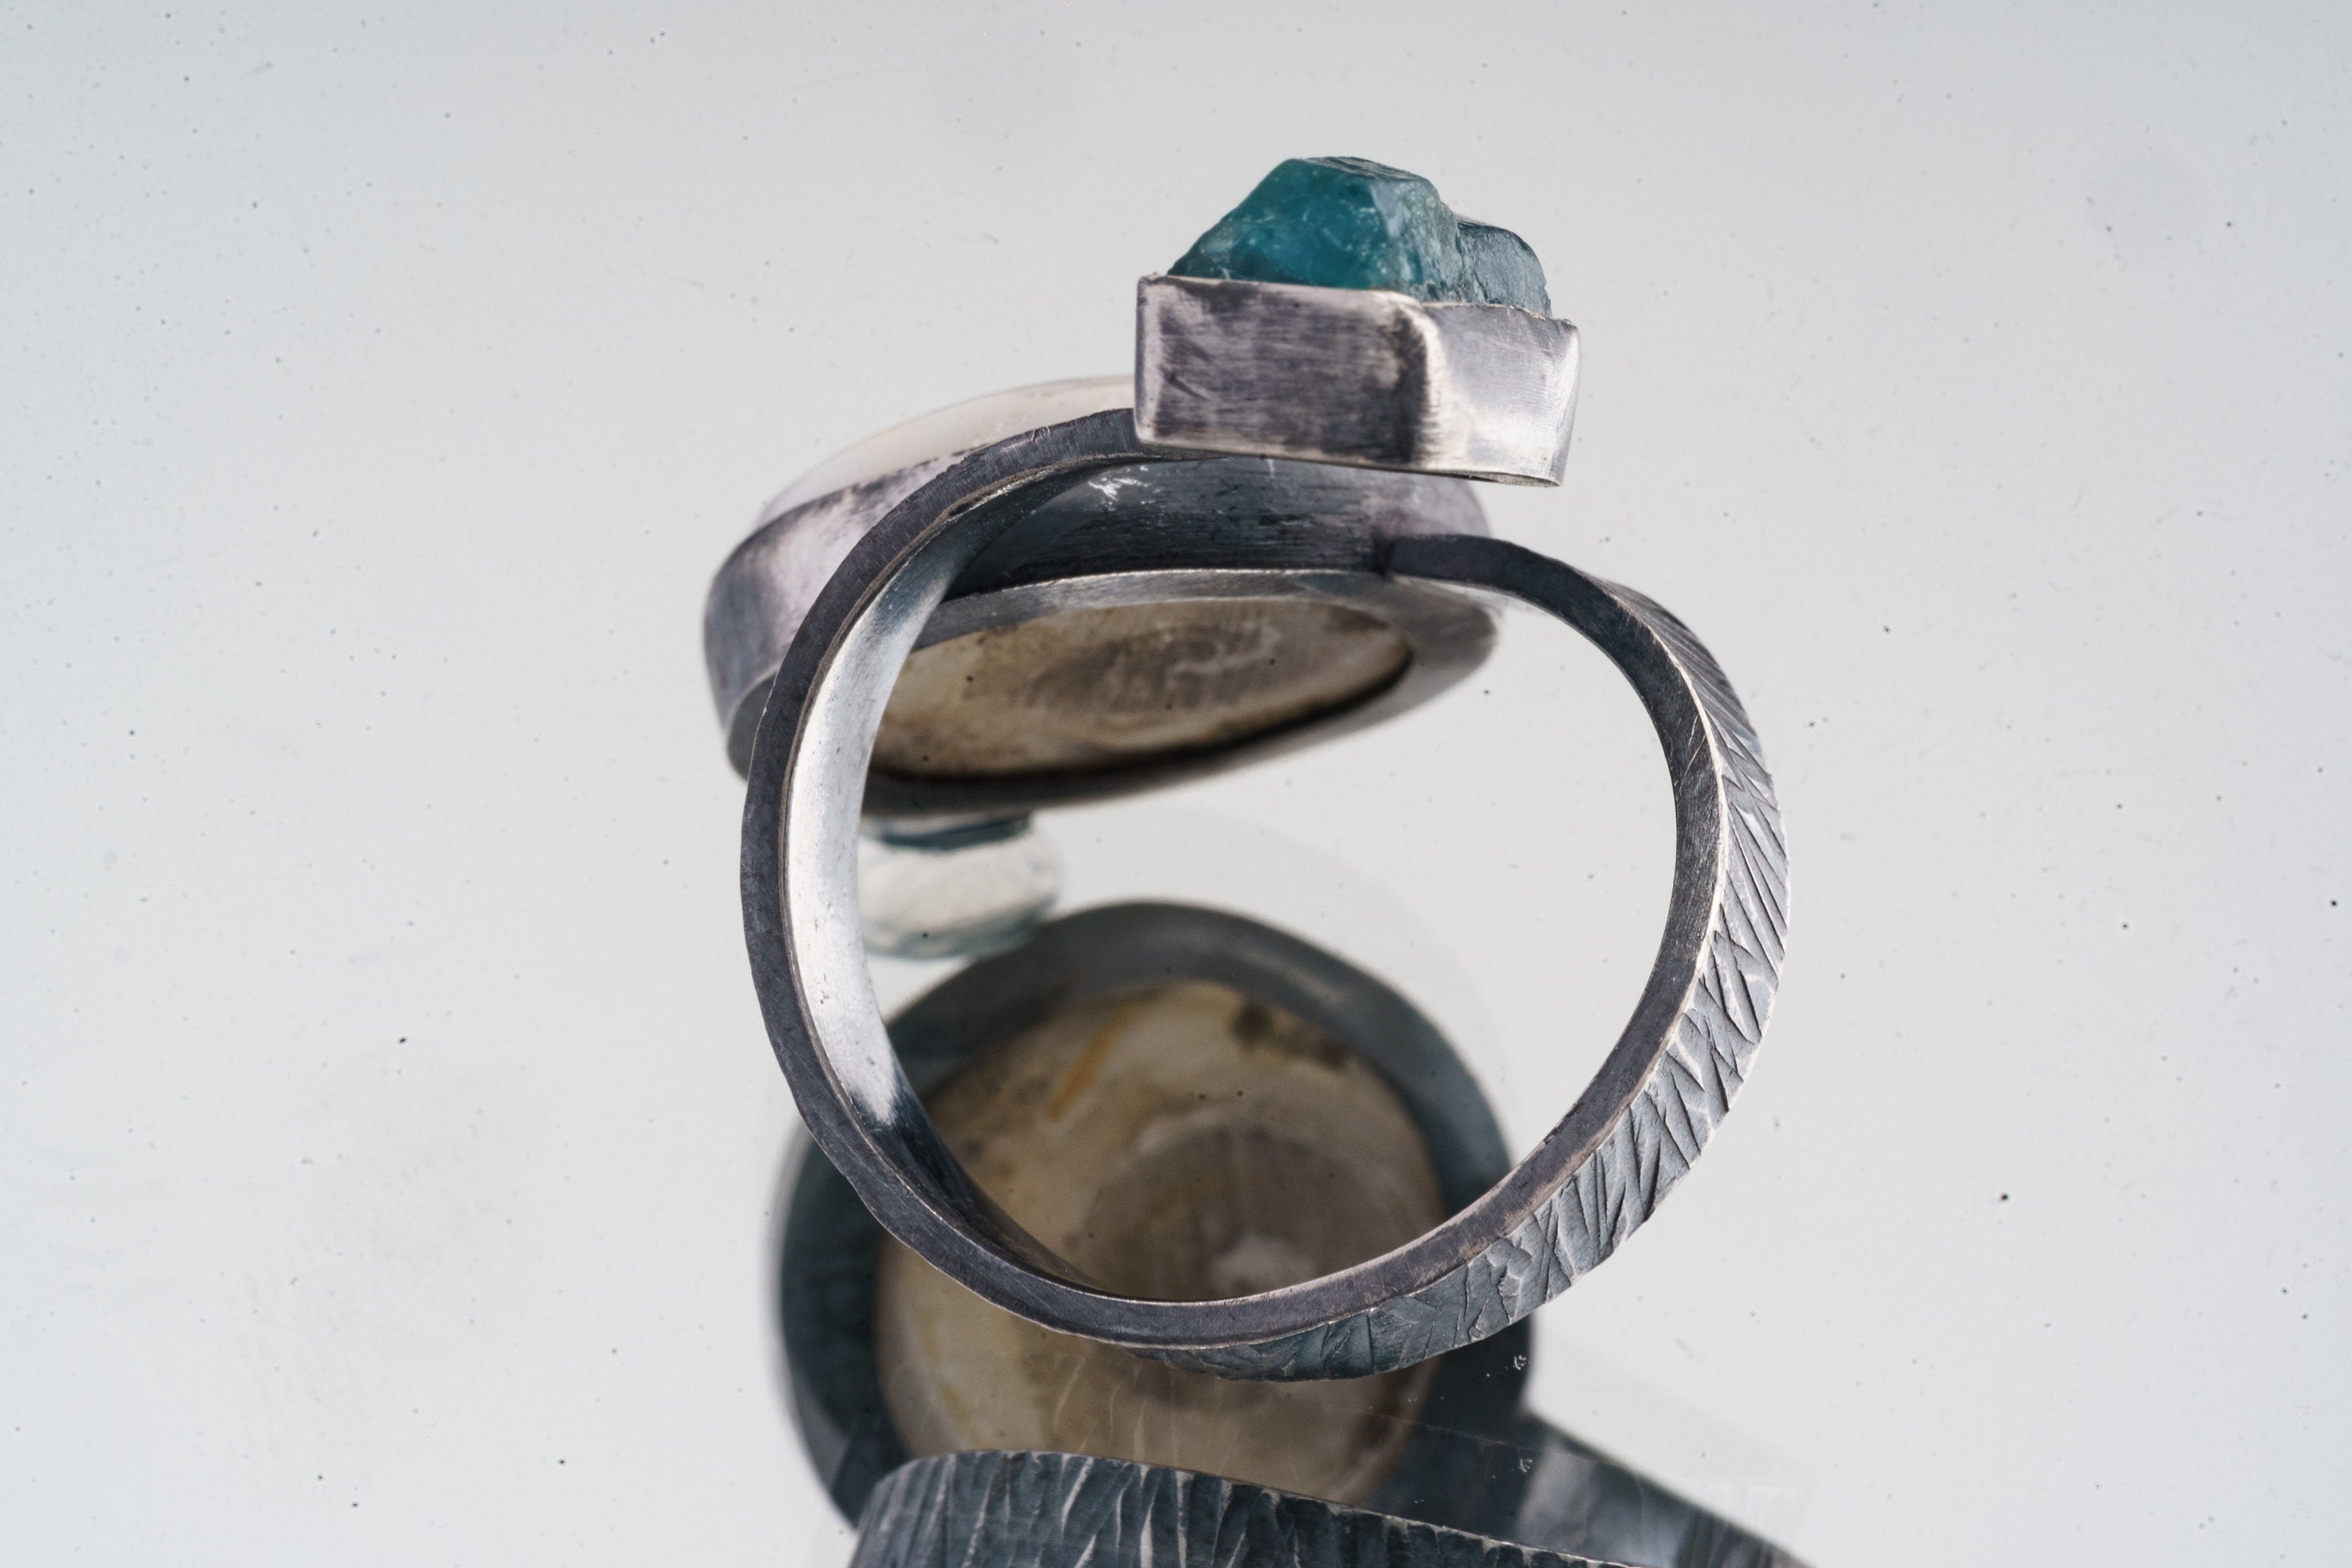 Terminated Gem Apatite and Crystallized Shell - Unisex - Size 4-10 US - Large Adjustable Sterling Silver Ring